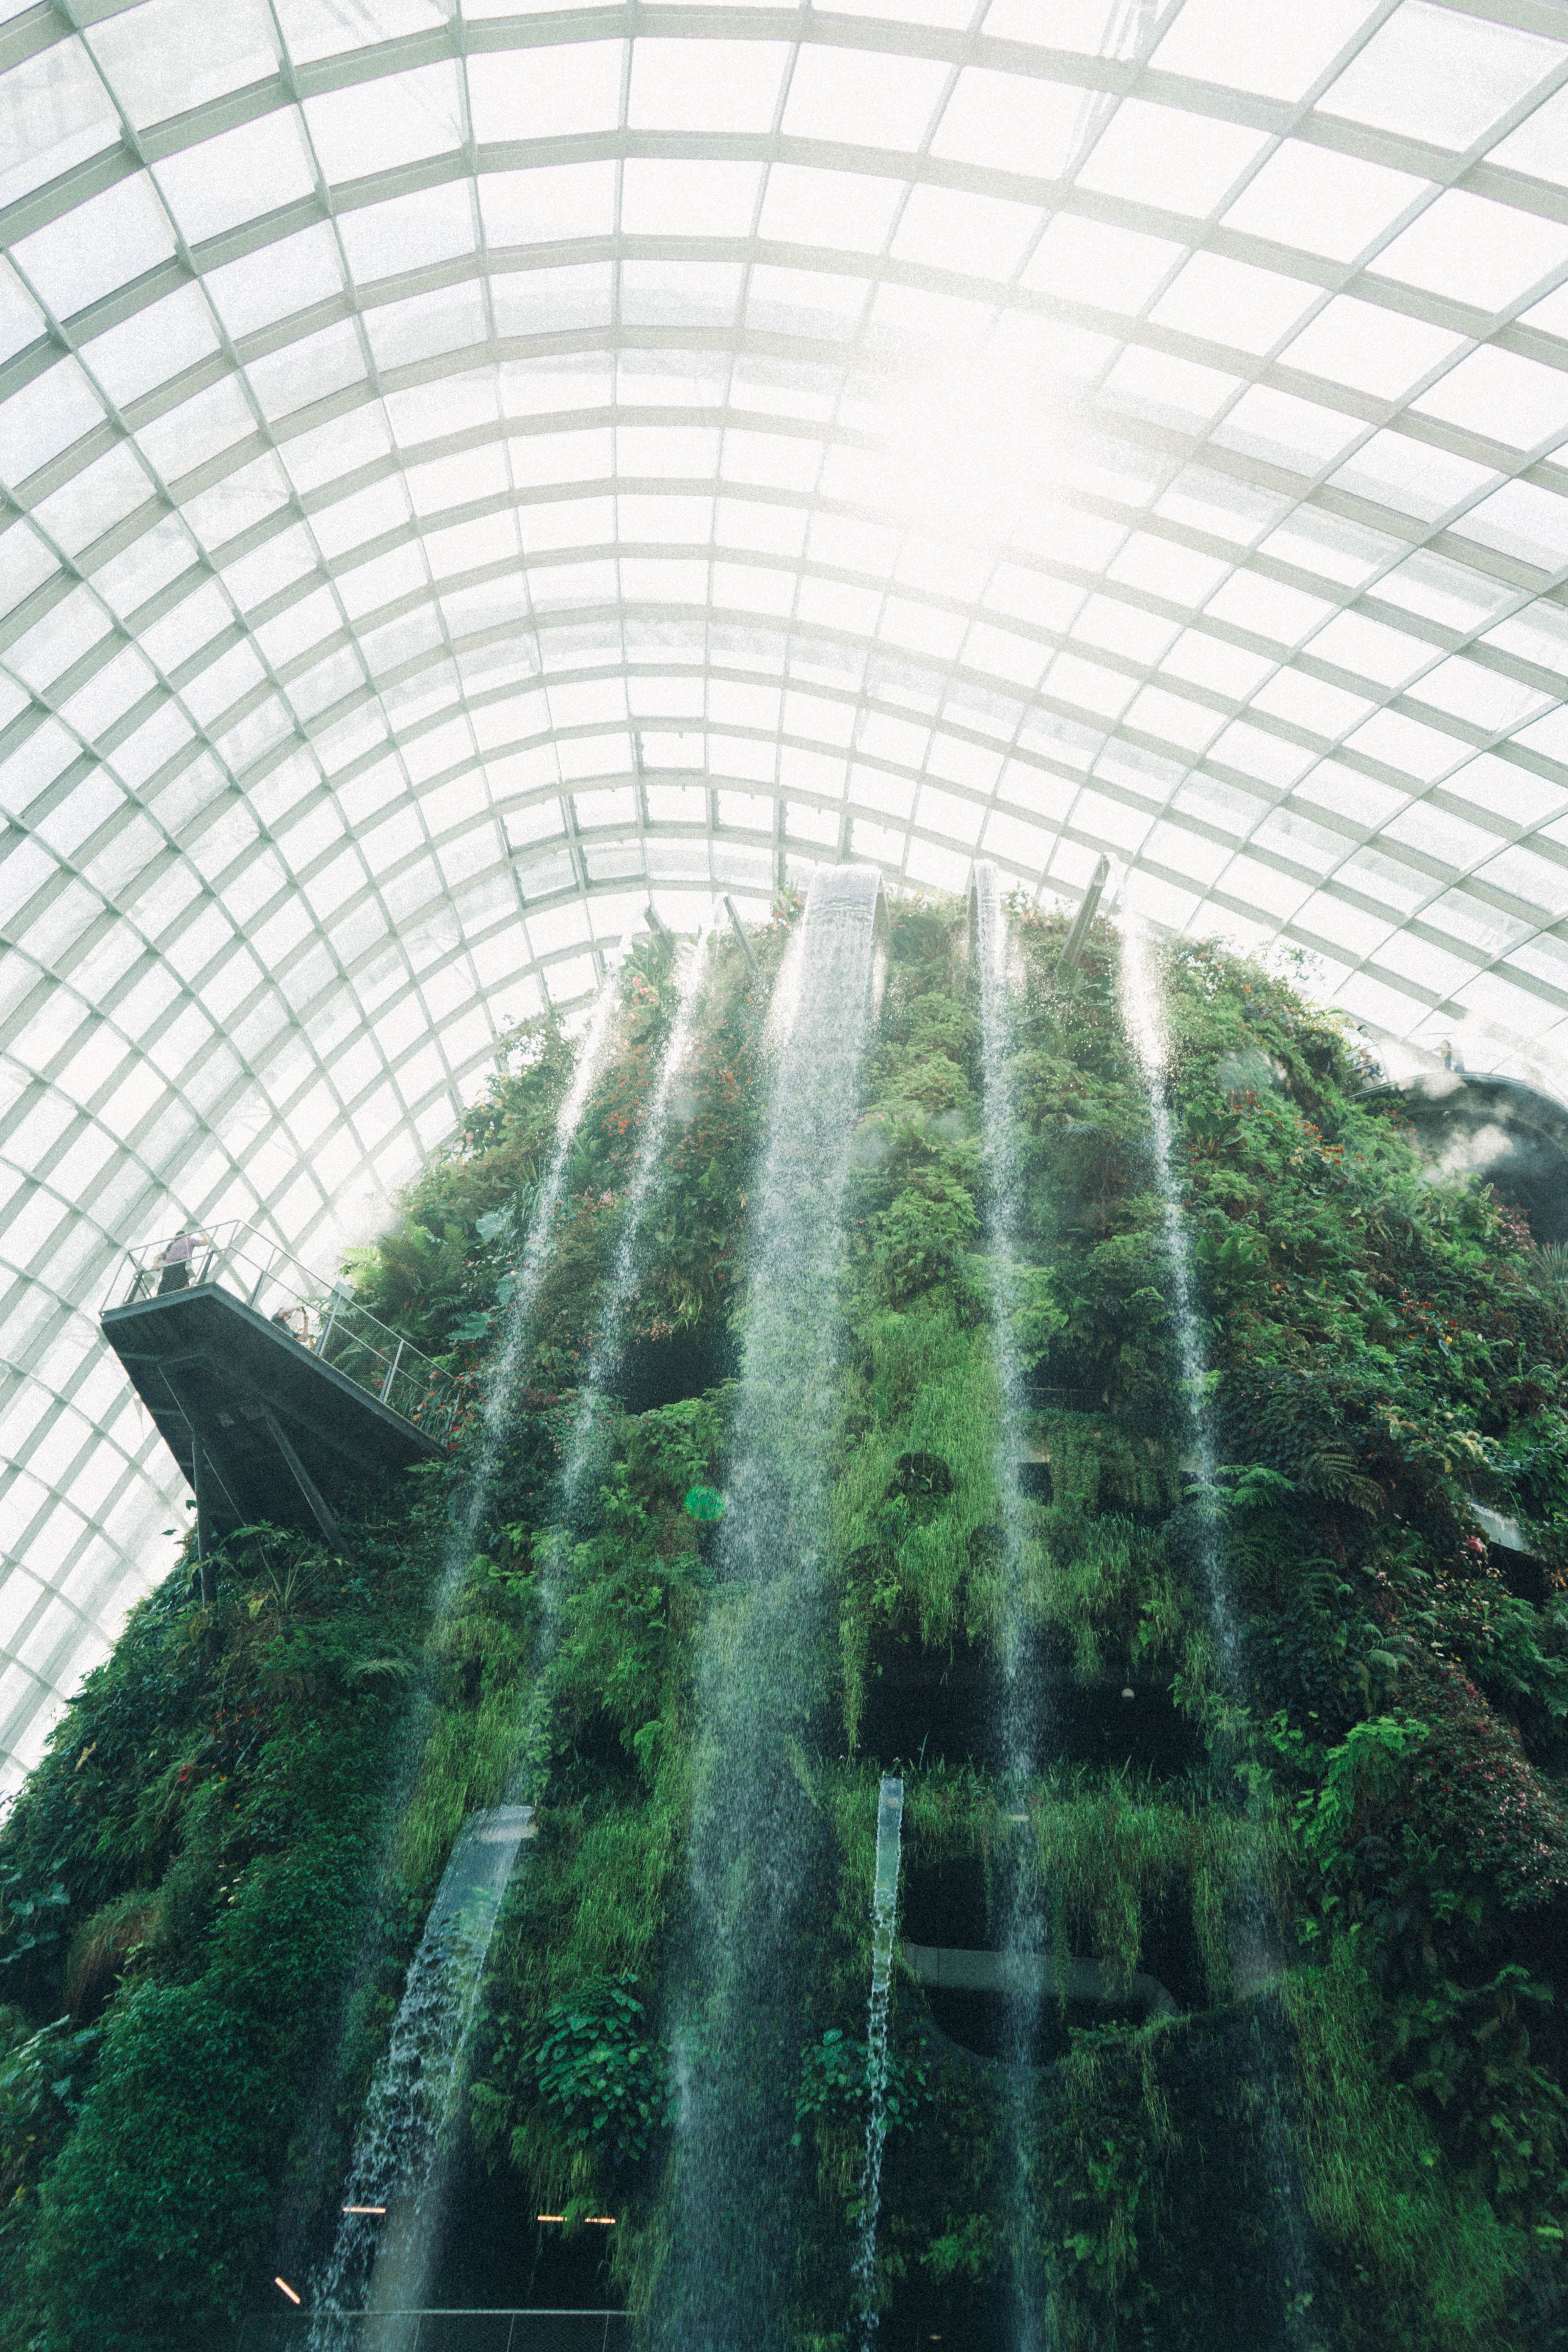 Plants and waterfall inside a glass building